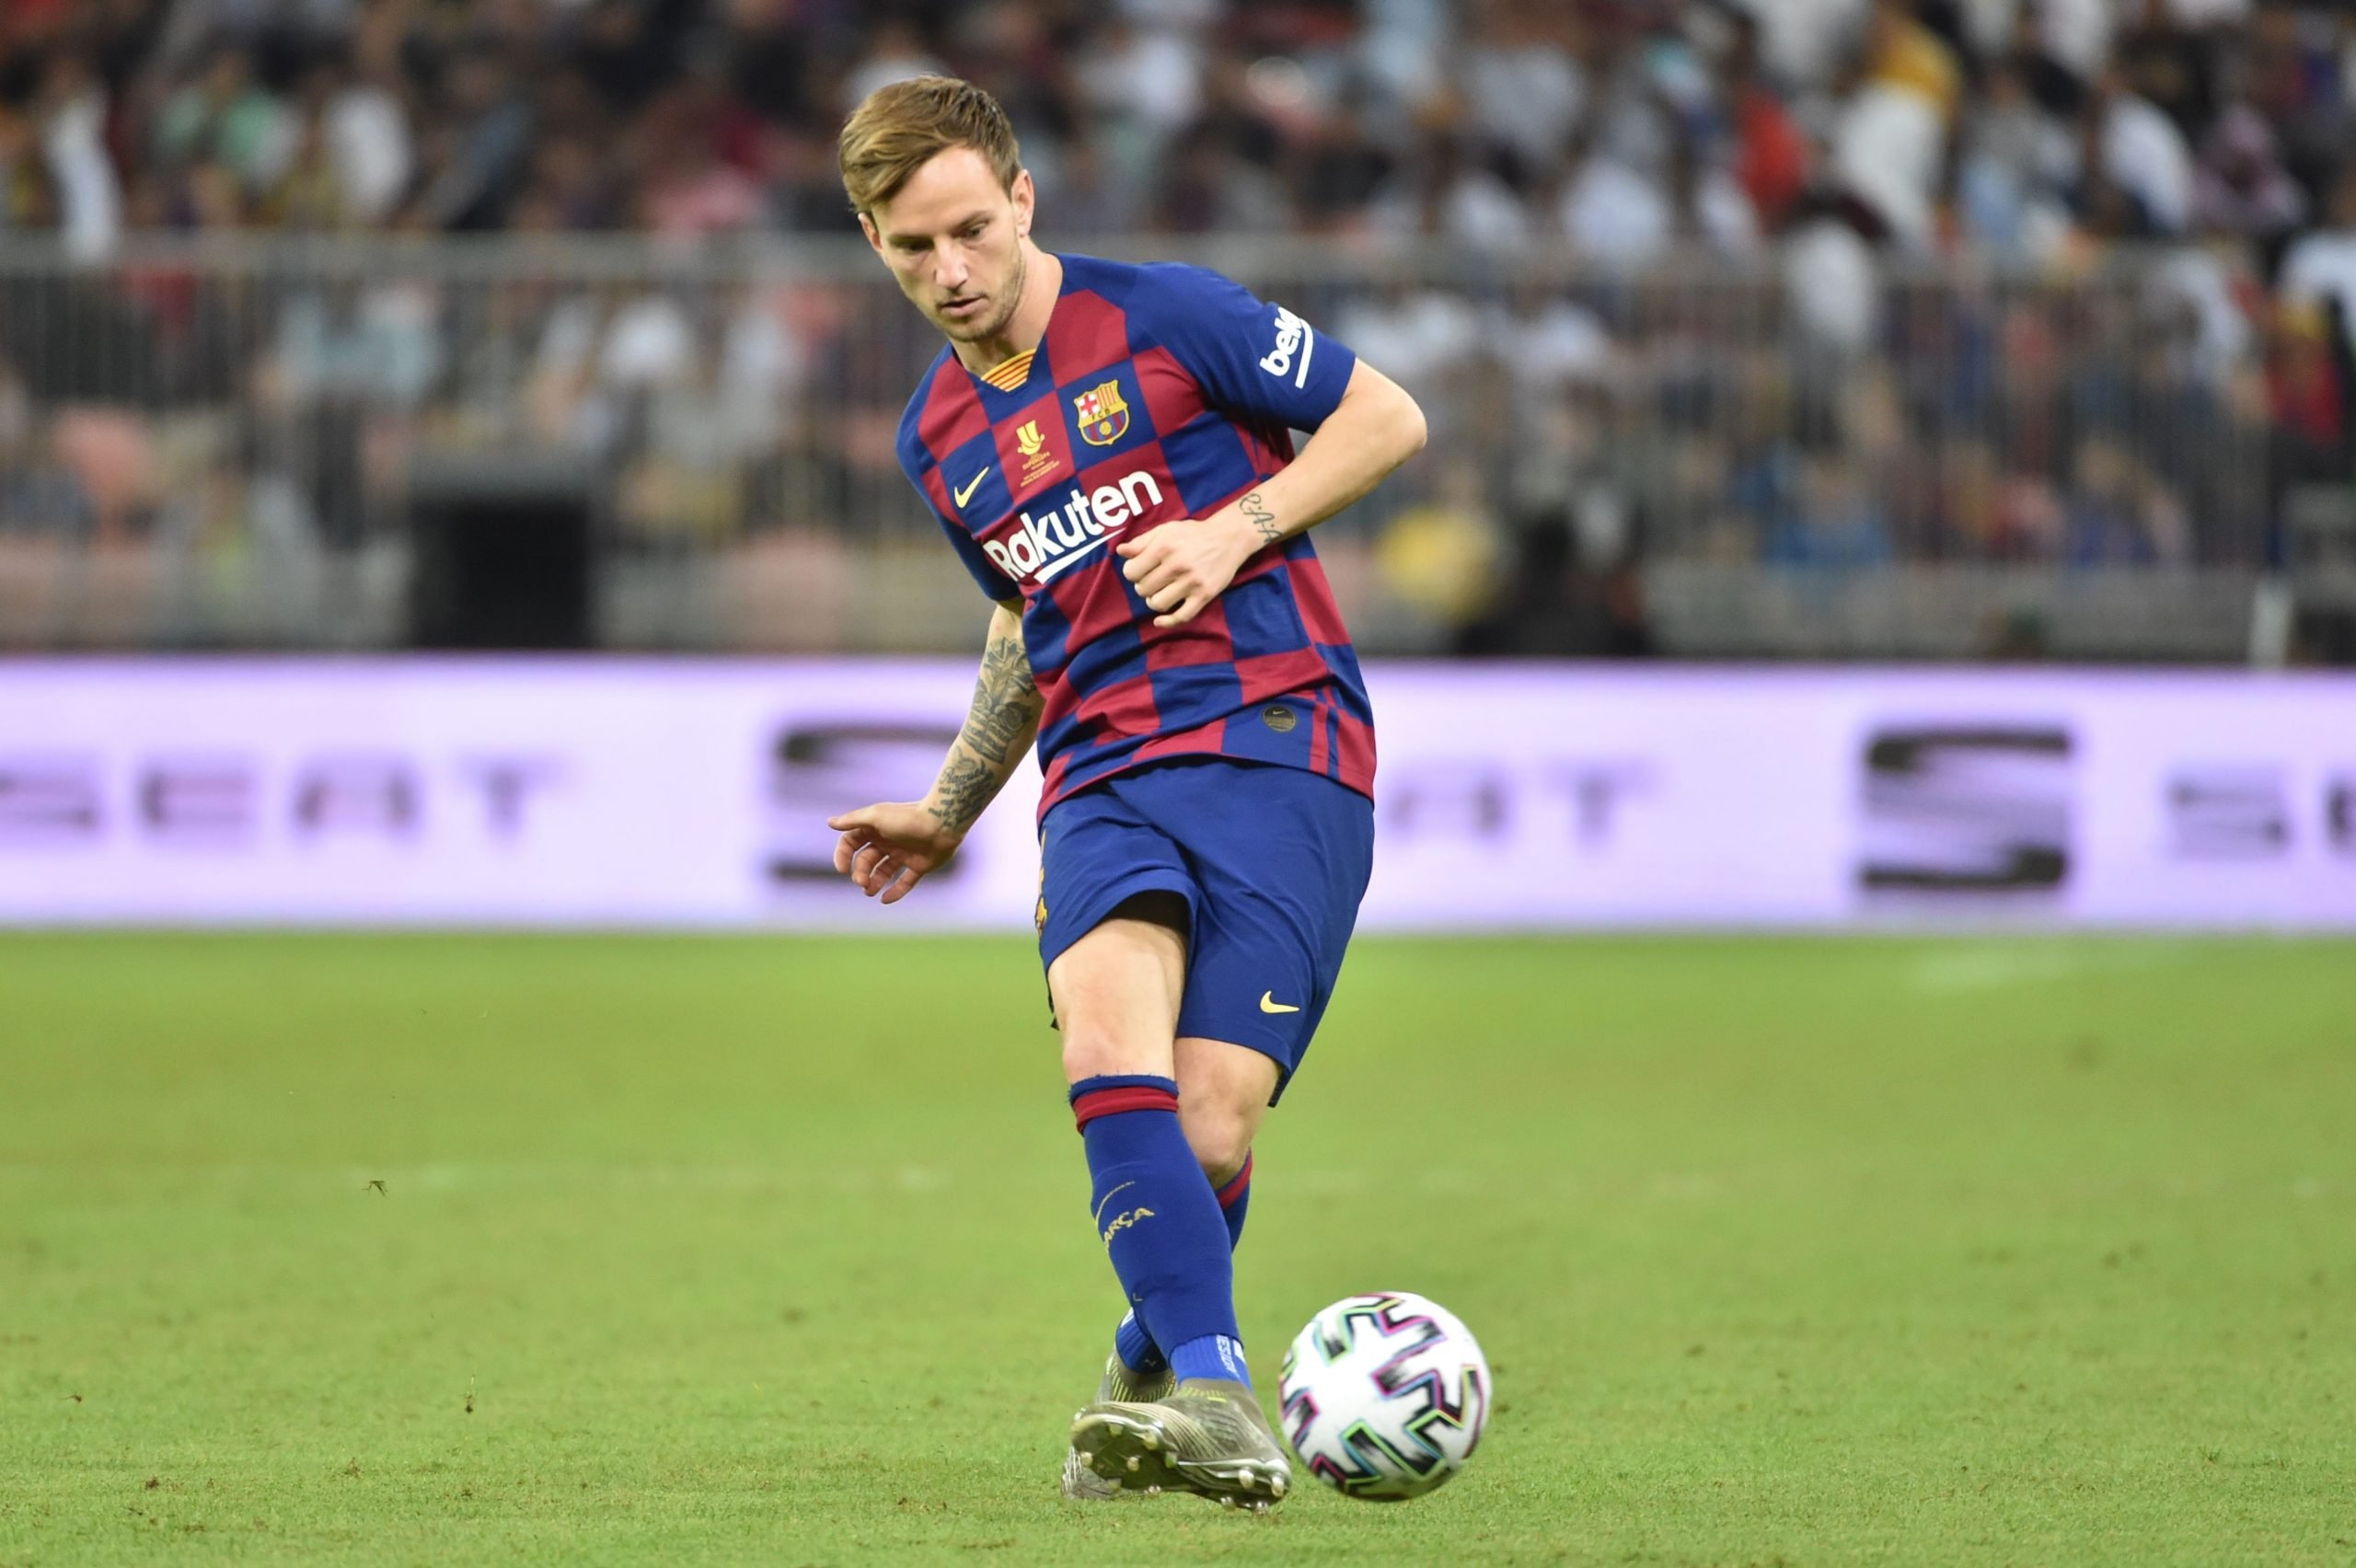 Barcelona's Croatian midfielder Ivan Rakitic passes the ball during the Spanish Super Cup semi final between Barcelona and Atletico Madrid on January 9, 2020, at the King Abdullah Sport City in the Saudi Arabian port city of Jeddah. - The winner will face Real Madrid in the final on January 12. (Photo by FAYEZ NURELDINE / AFP) (Photo by FAYEZ NURELDINE/AFP via Getty Images)